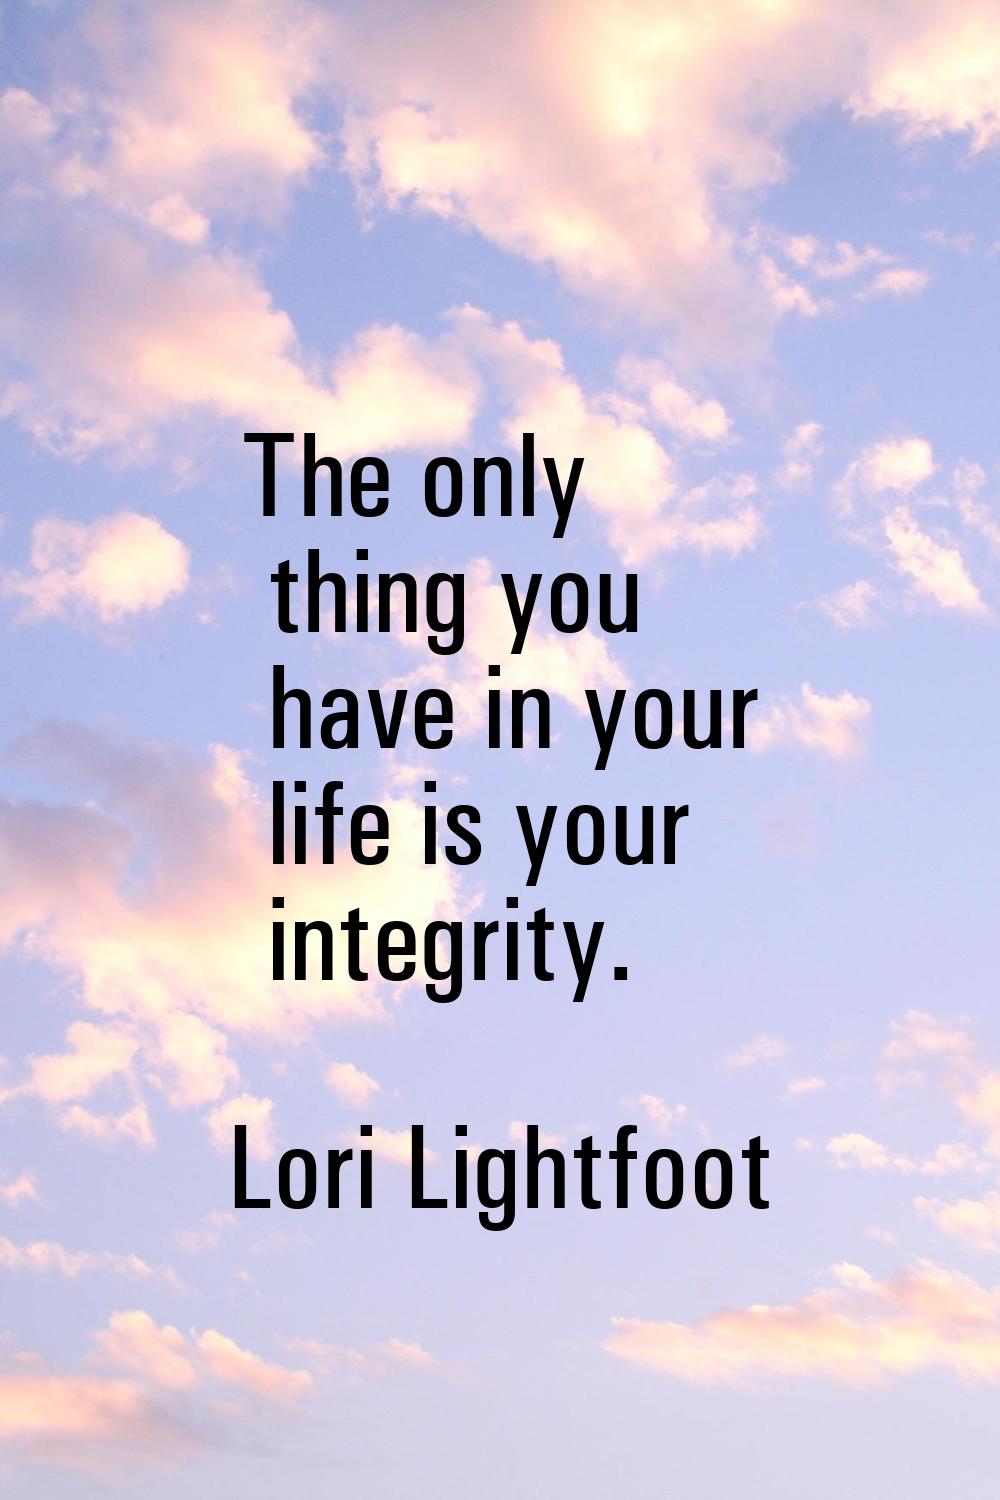 The only thing you have in your life is your integrity.